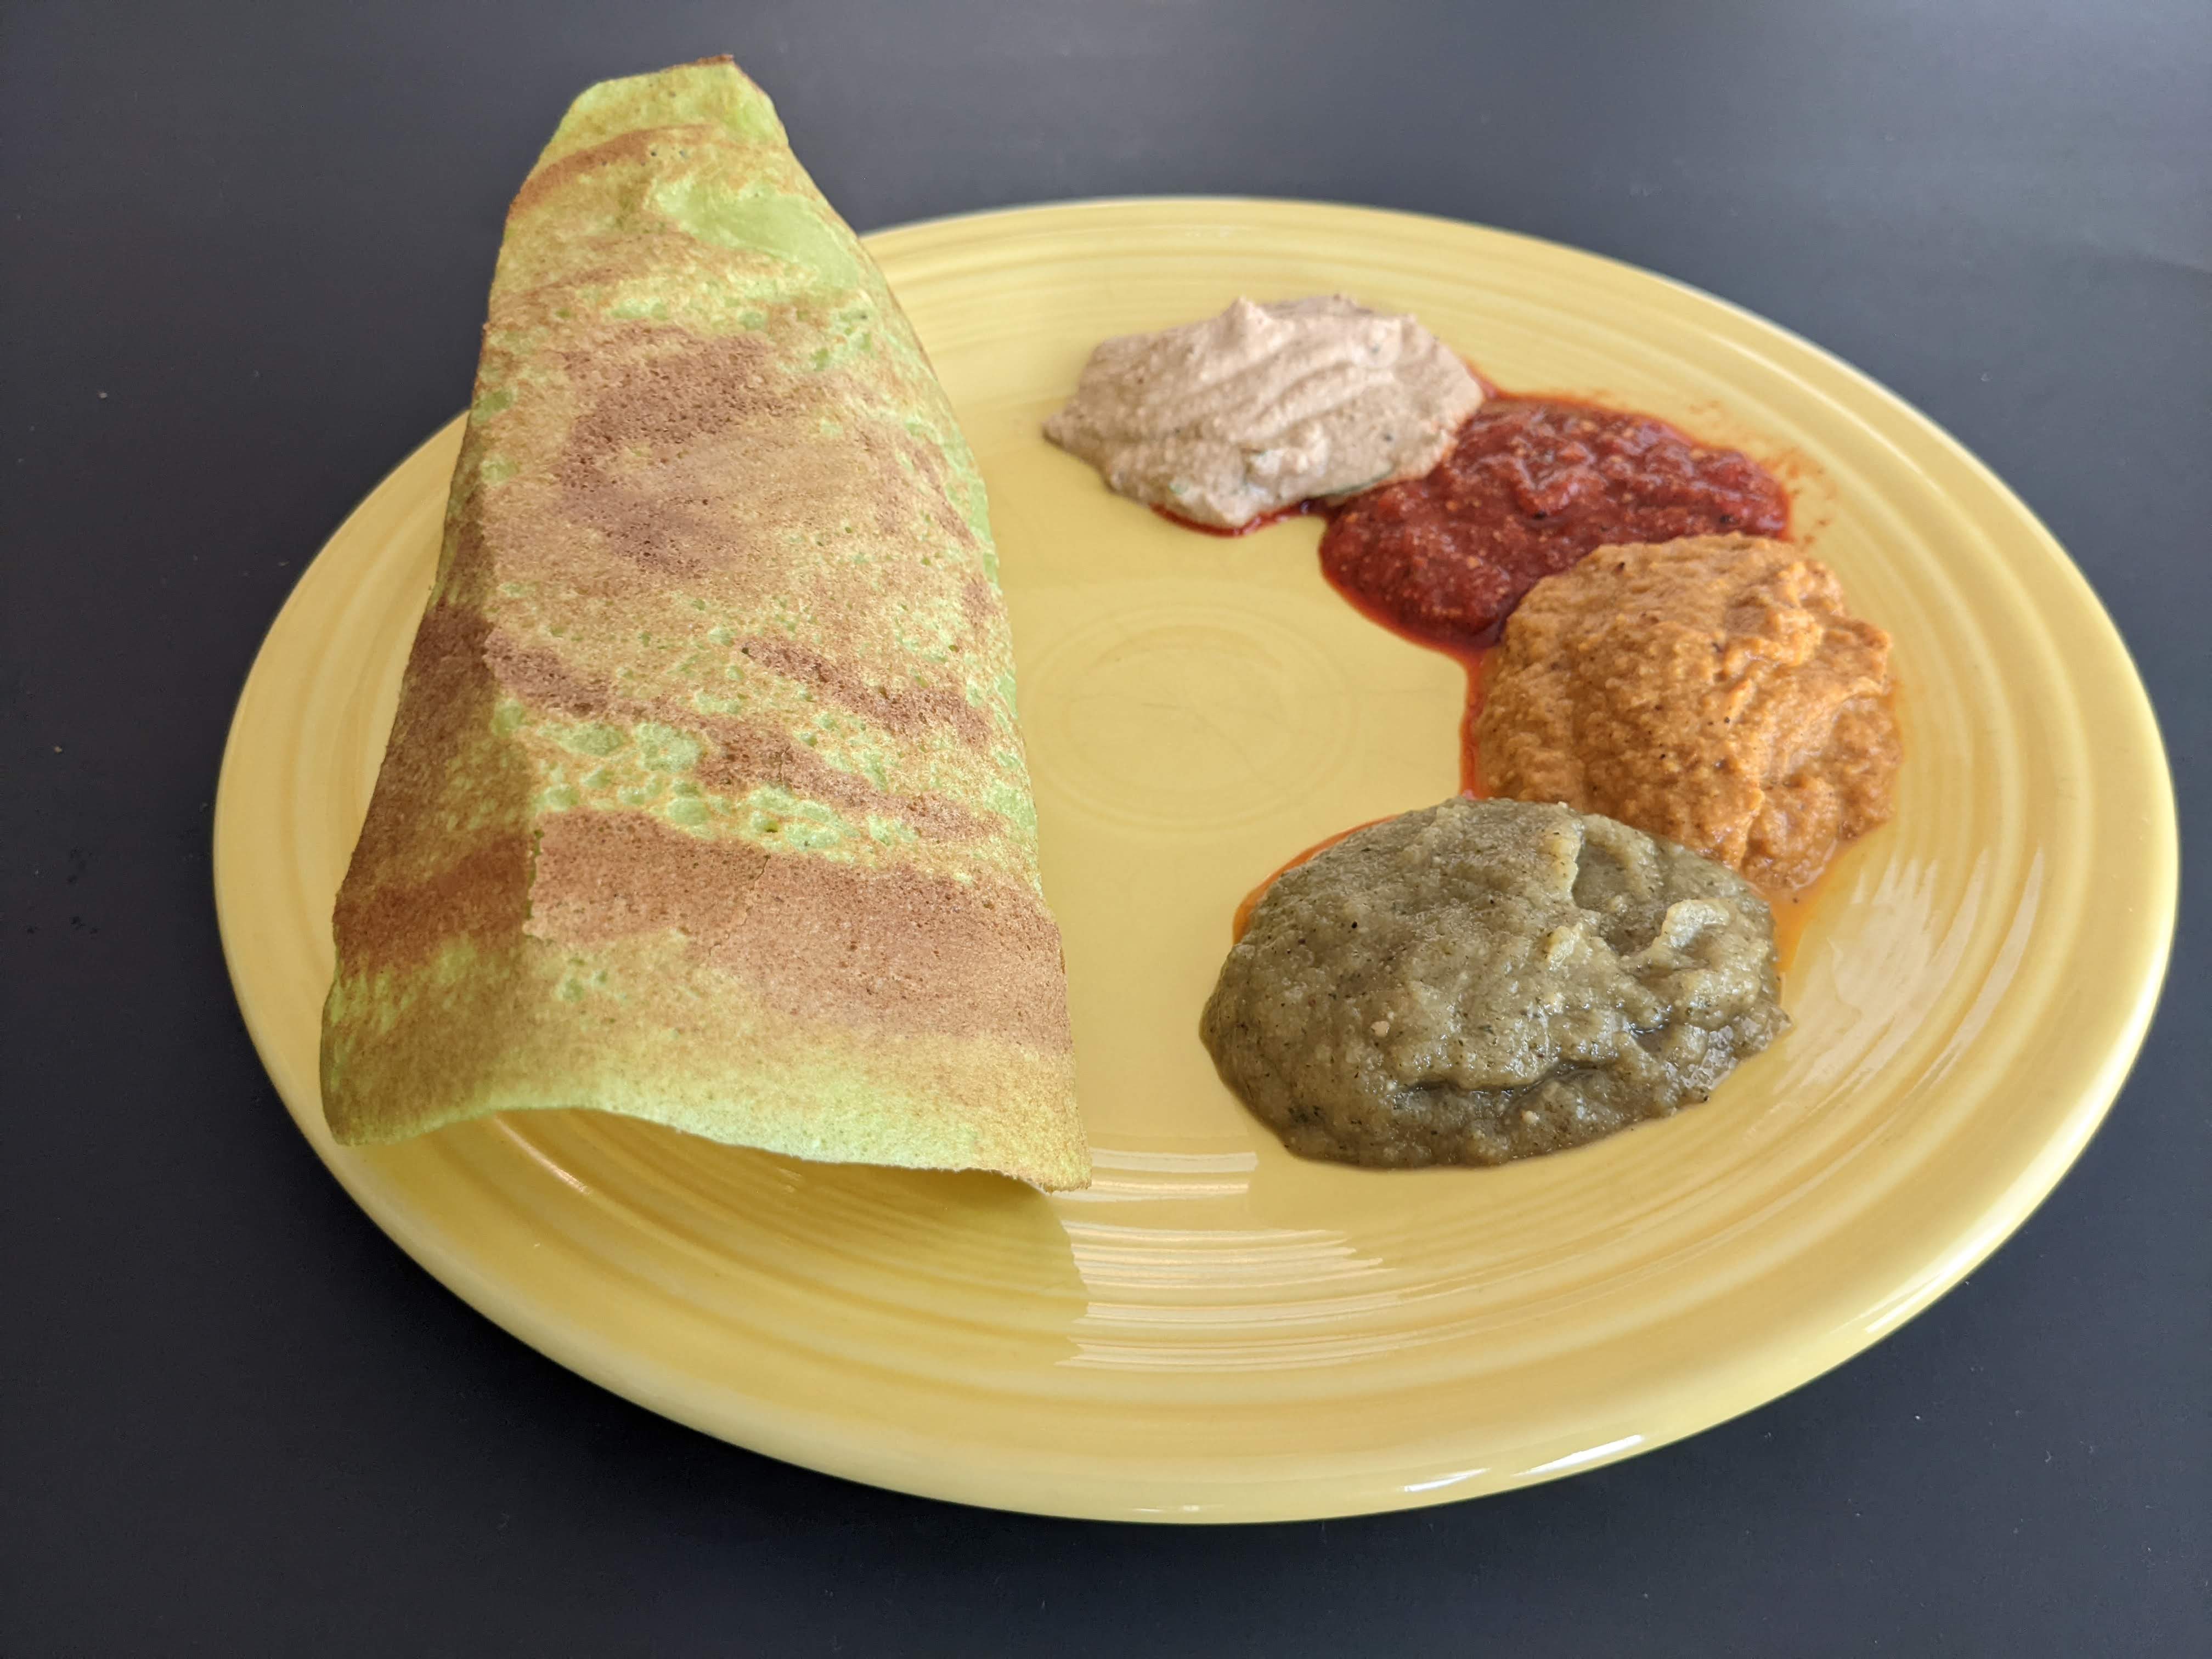 Apr. 22: Indian Crepes and Chutneys (#207420-01)